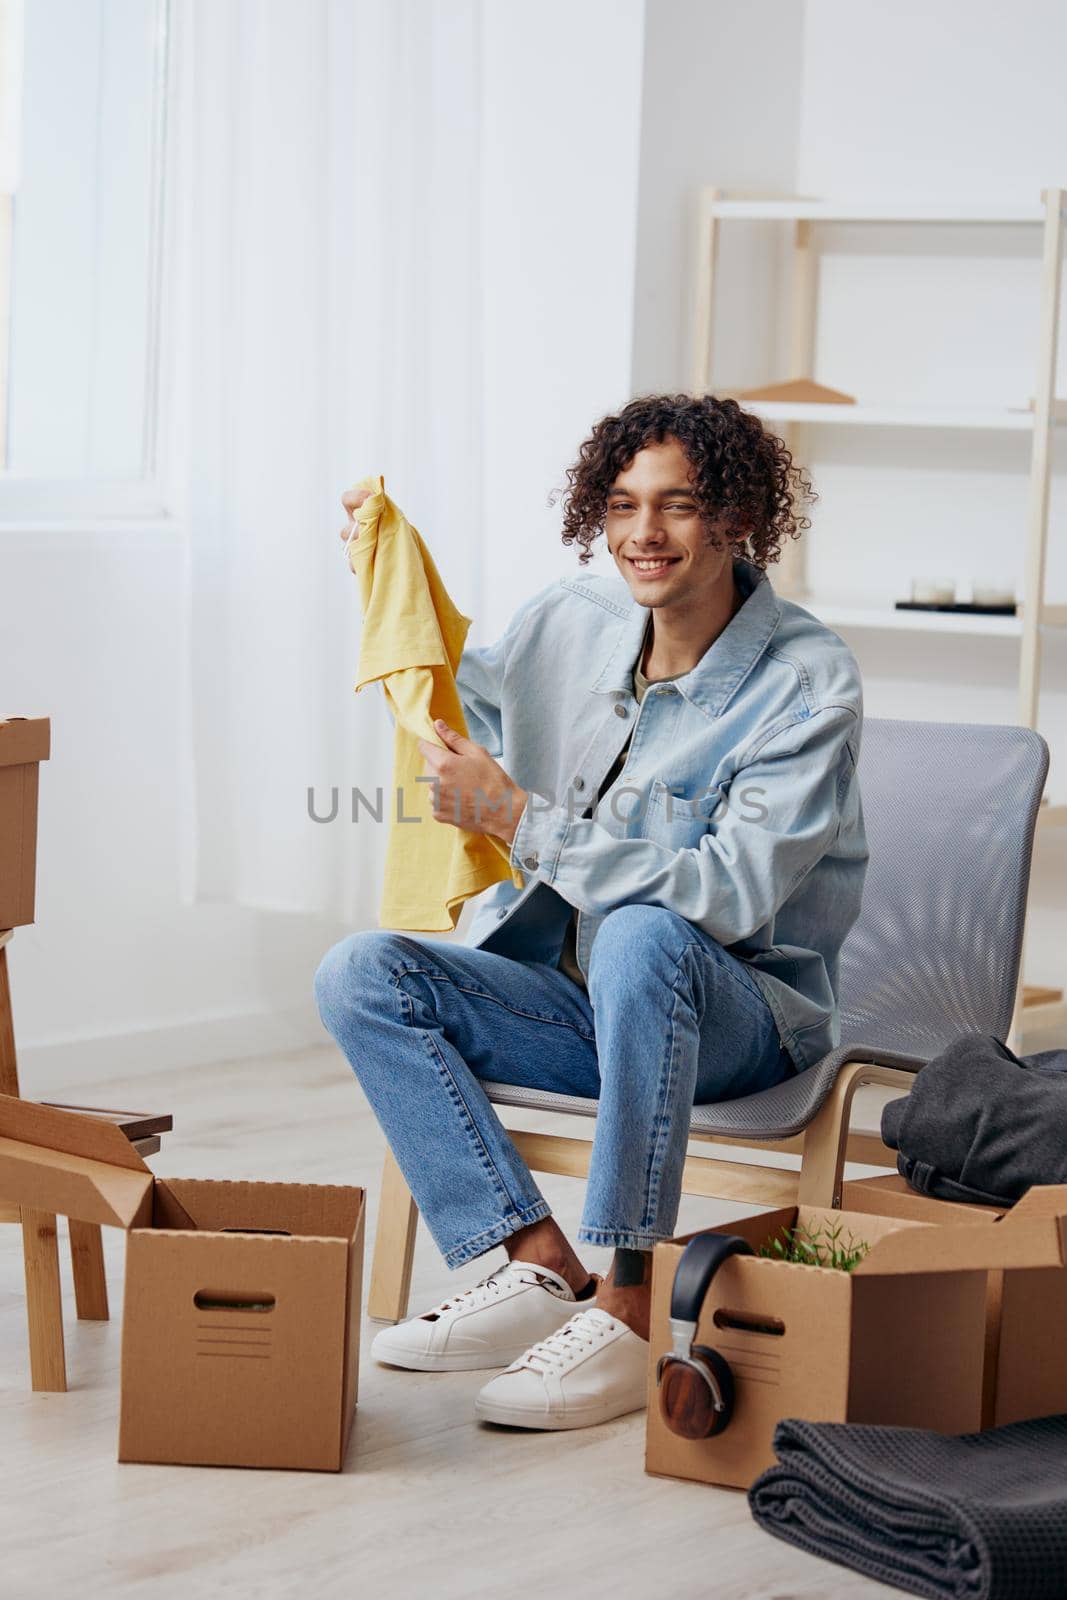 A young man sitting on a chair with boxes interior moving by SHOTPRIME